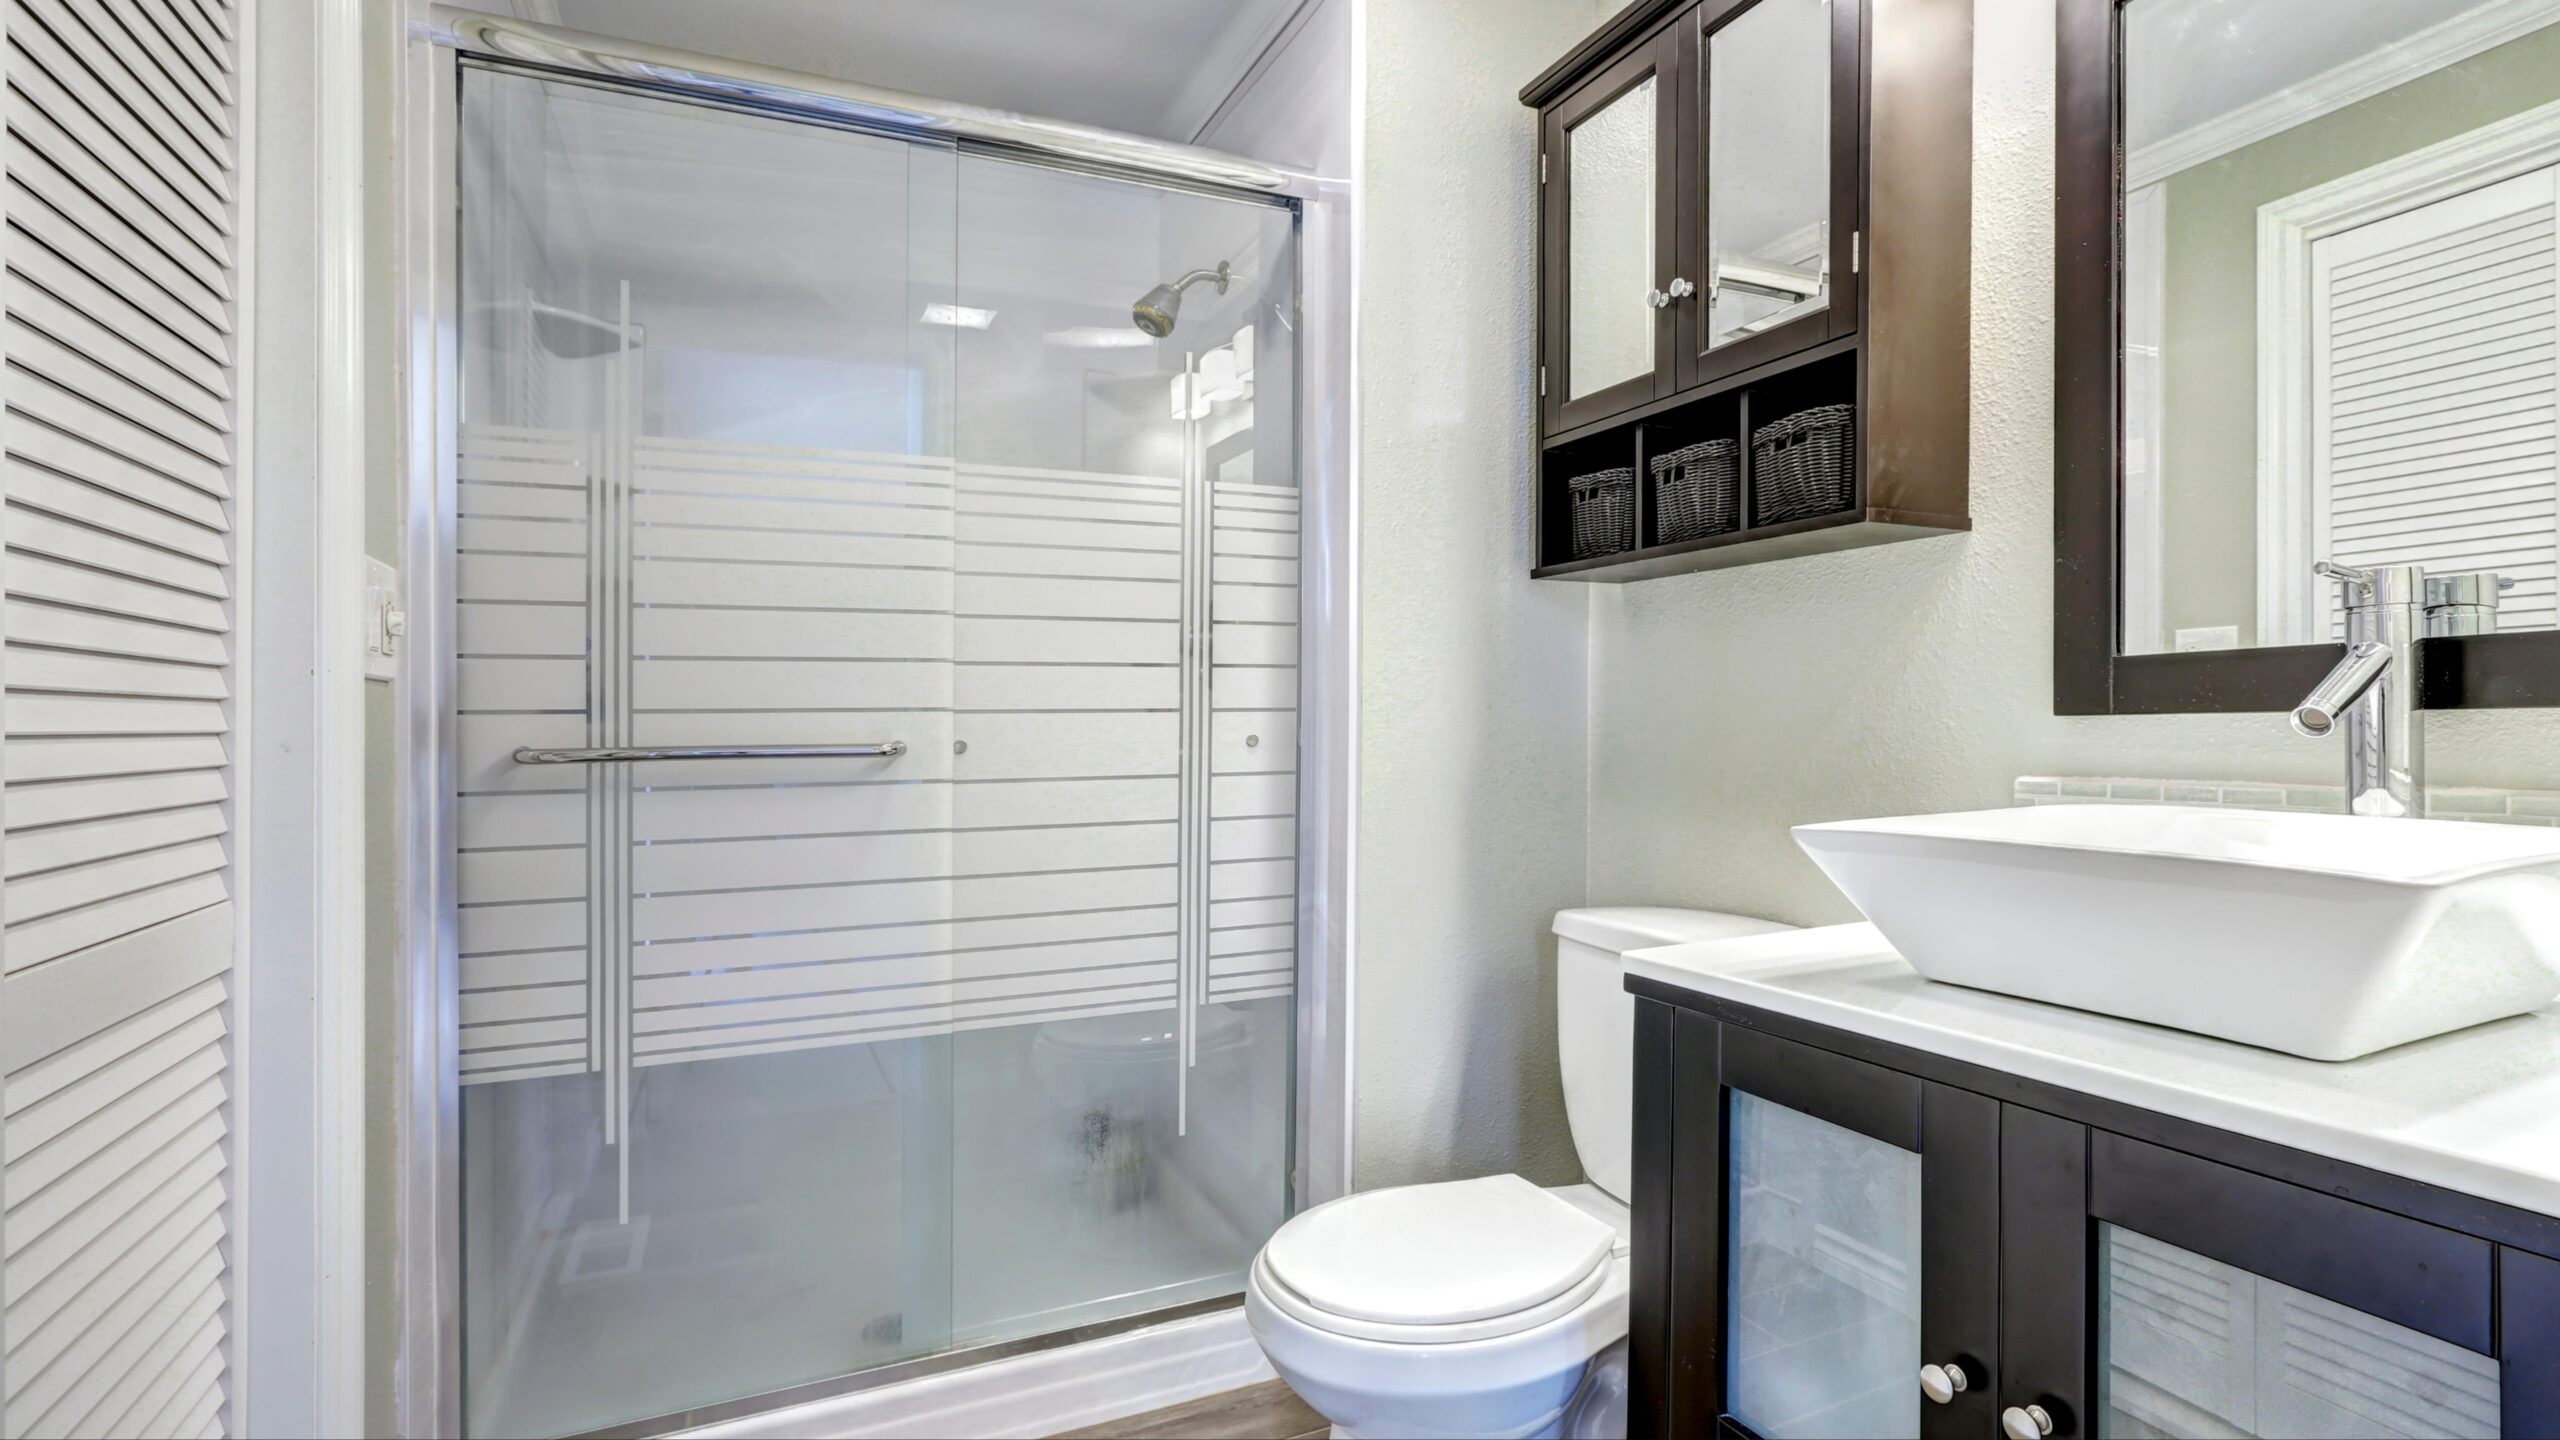 A walk-in shower with glass doors